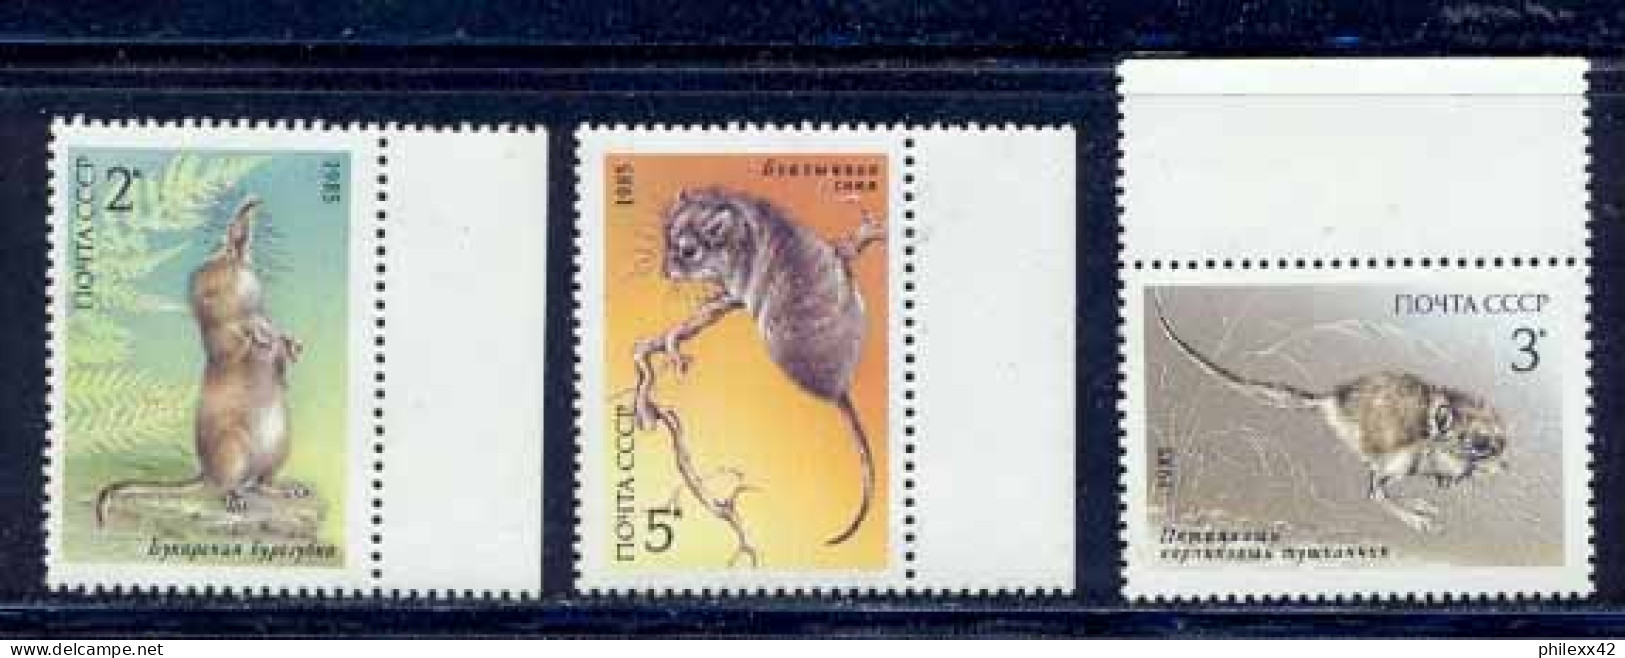 Russie (Russia Urss USSR) - 166 - N°5240 / 5242 Faune (Animals & Fauna) RONGEURS - Rongeurs